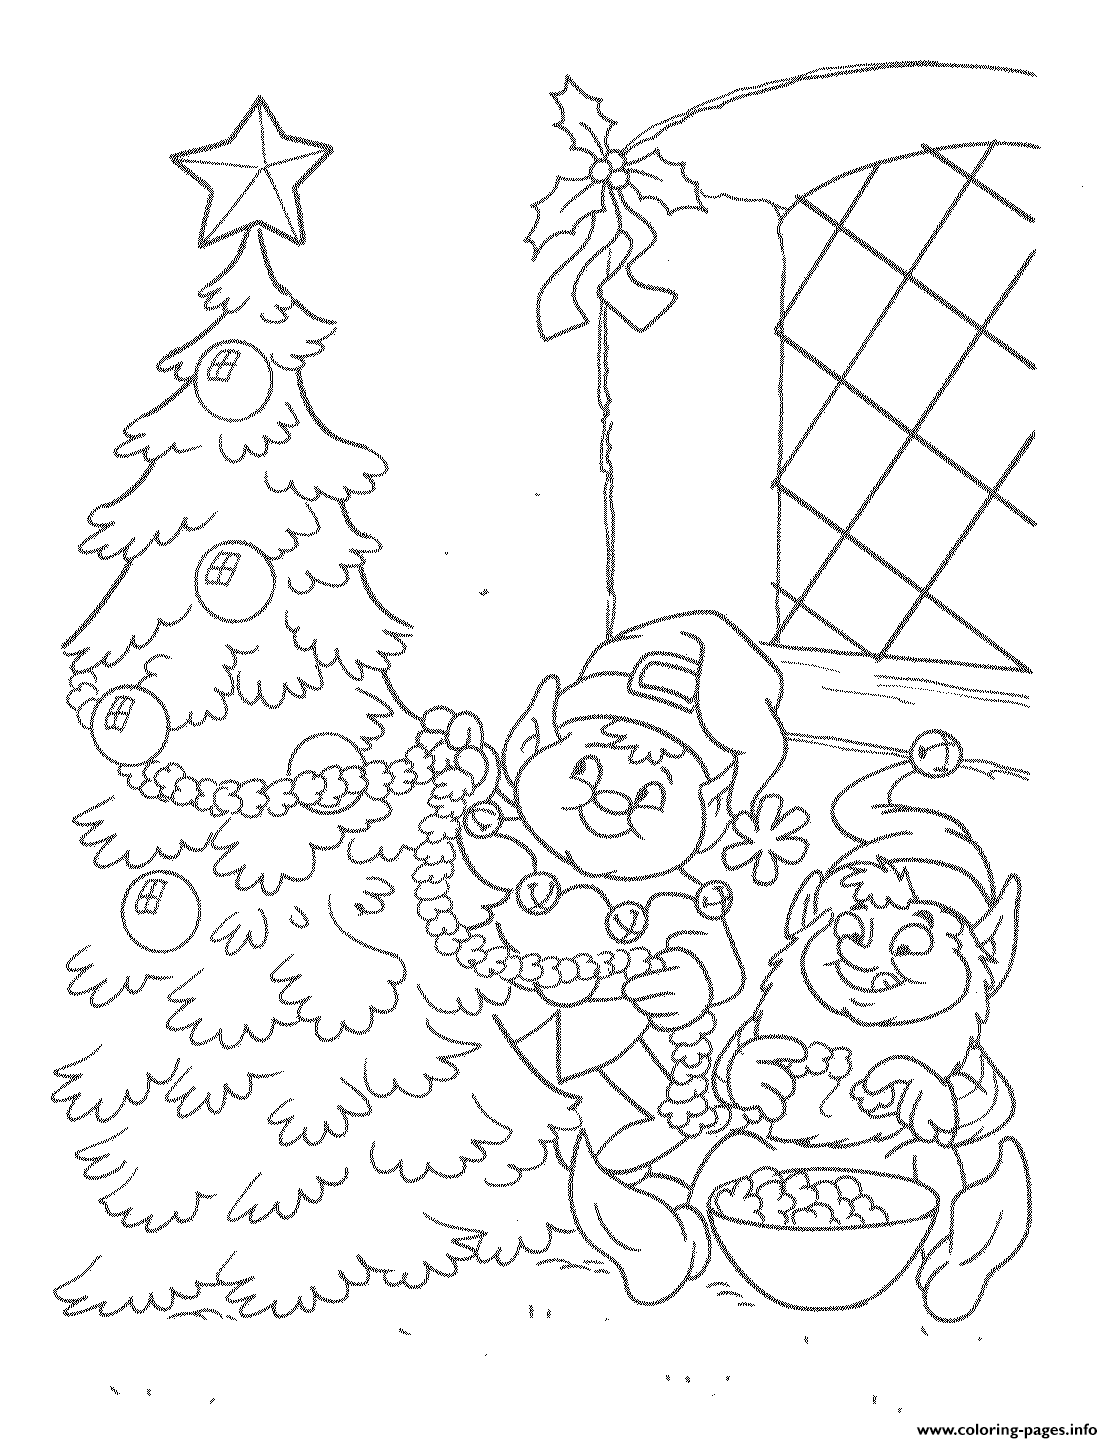 Decorating Tree Christmas Elf S8ab0 coloring